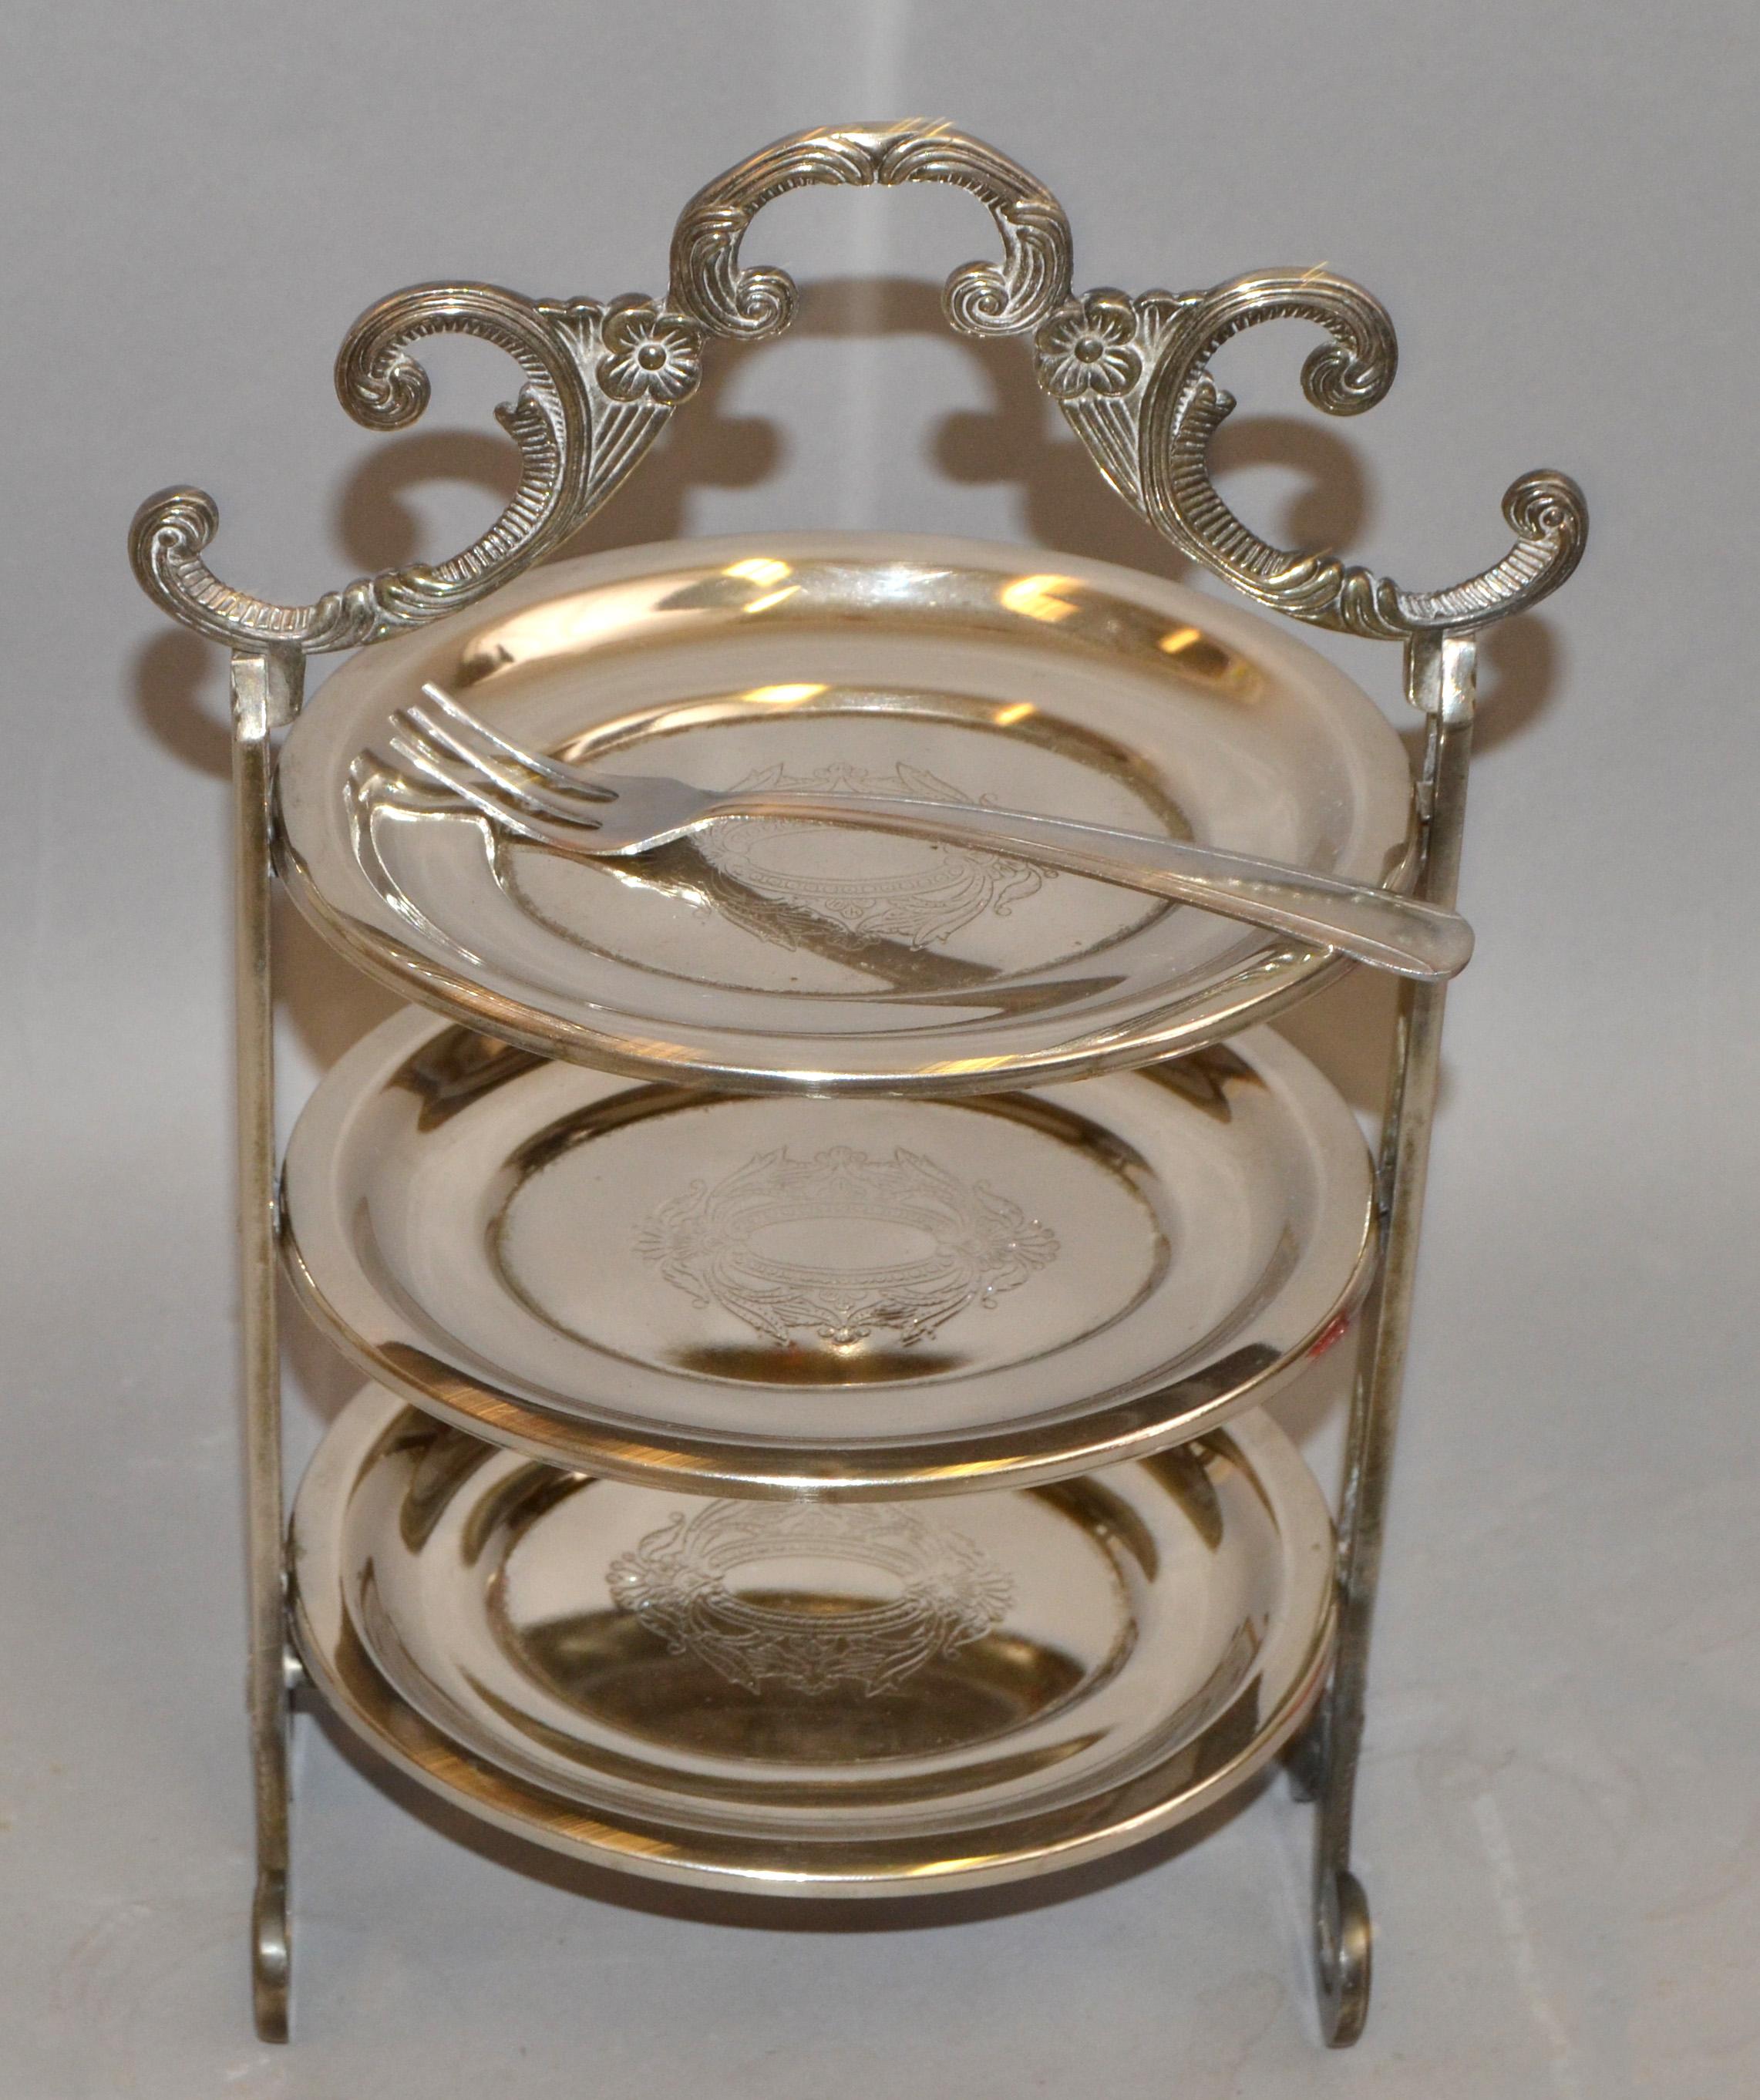 3 tier silver plated dessert stand